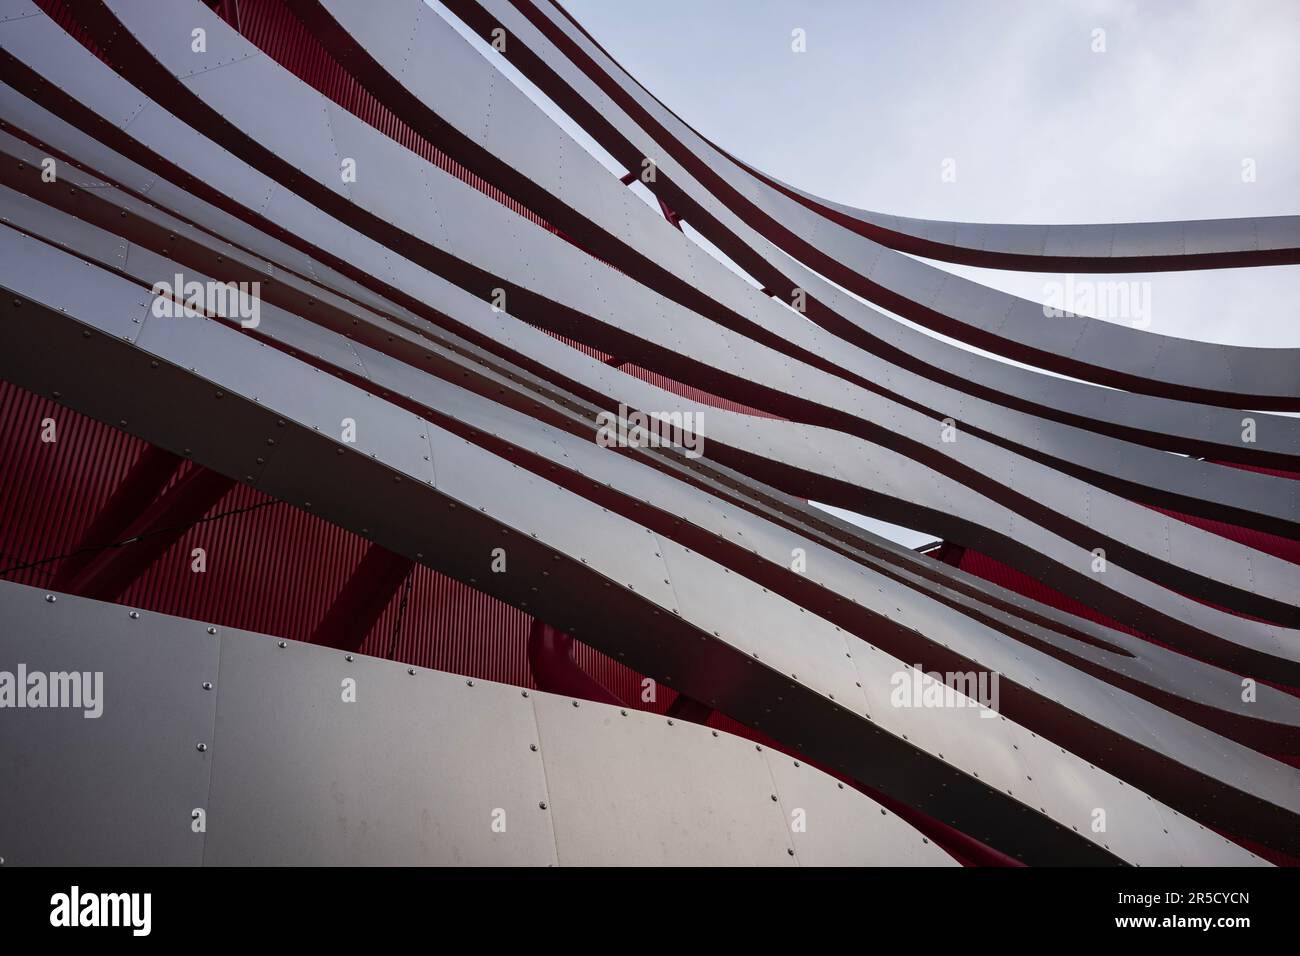 Los Angeles, CA, USA - Dec 26, 2022: The Petersen Automotive Museum has an unique architectural feature of aluminum ribbons to evoke a sense of speed Stock Photo